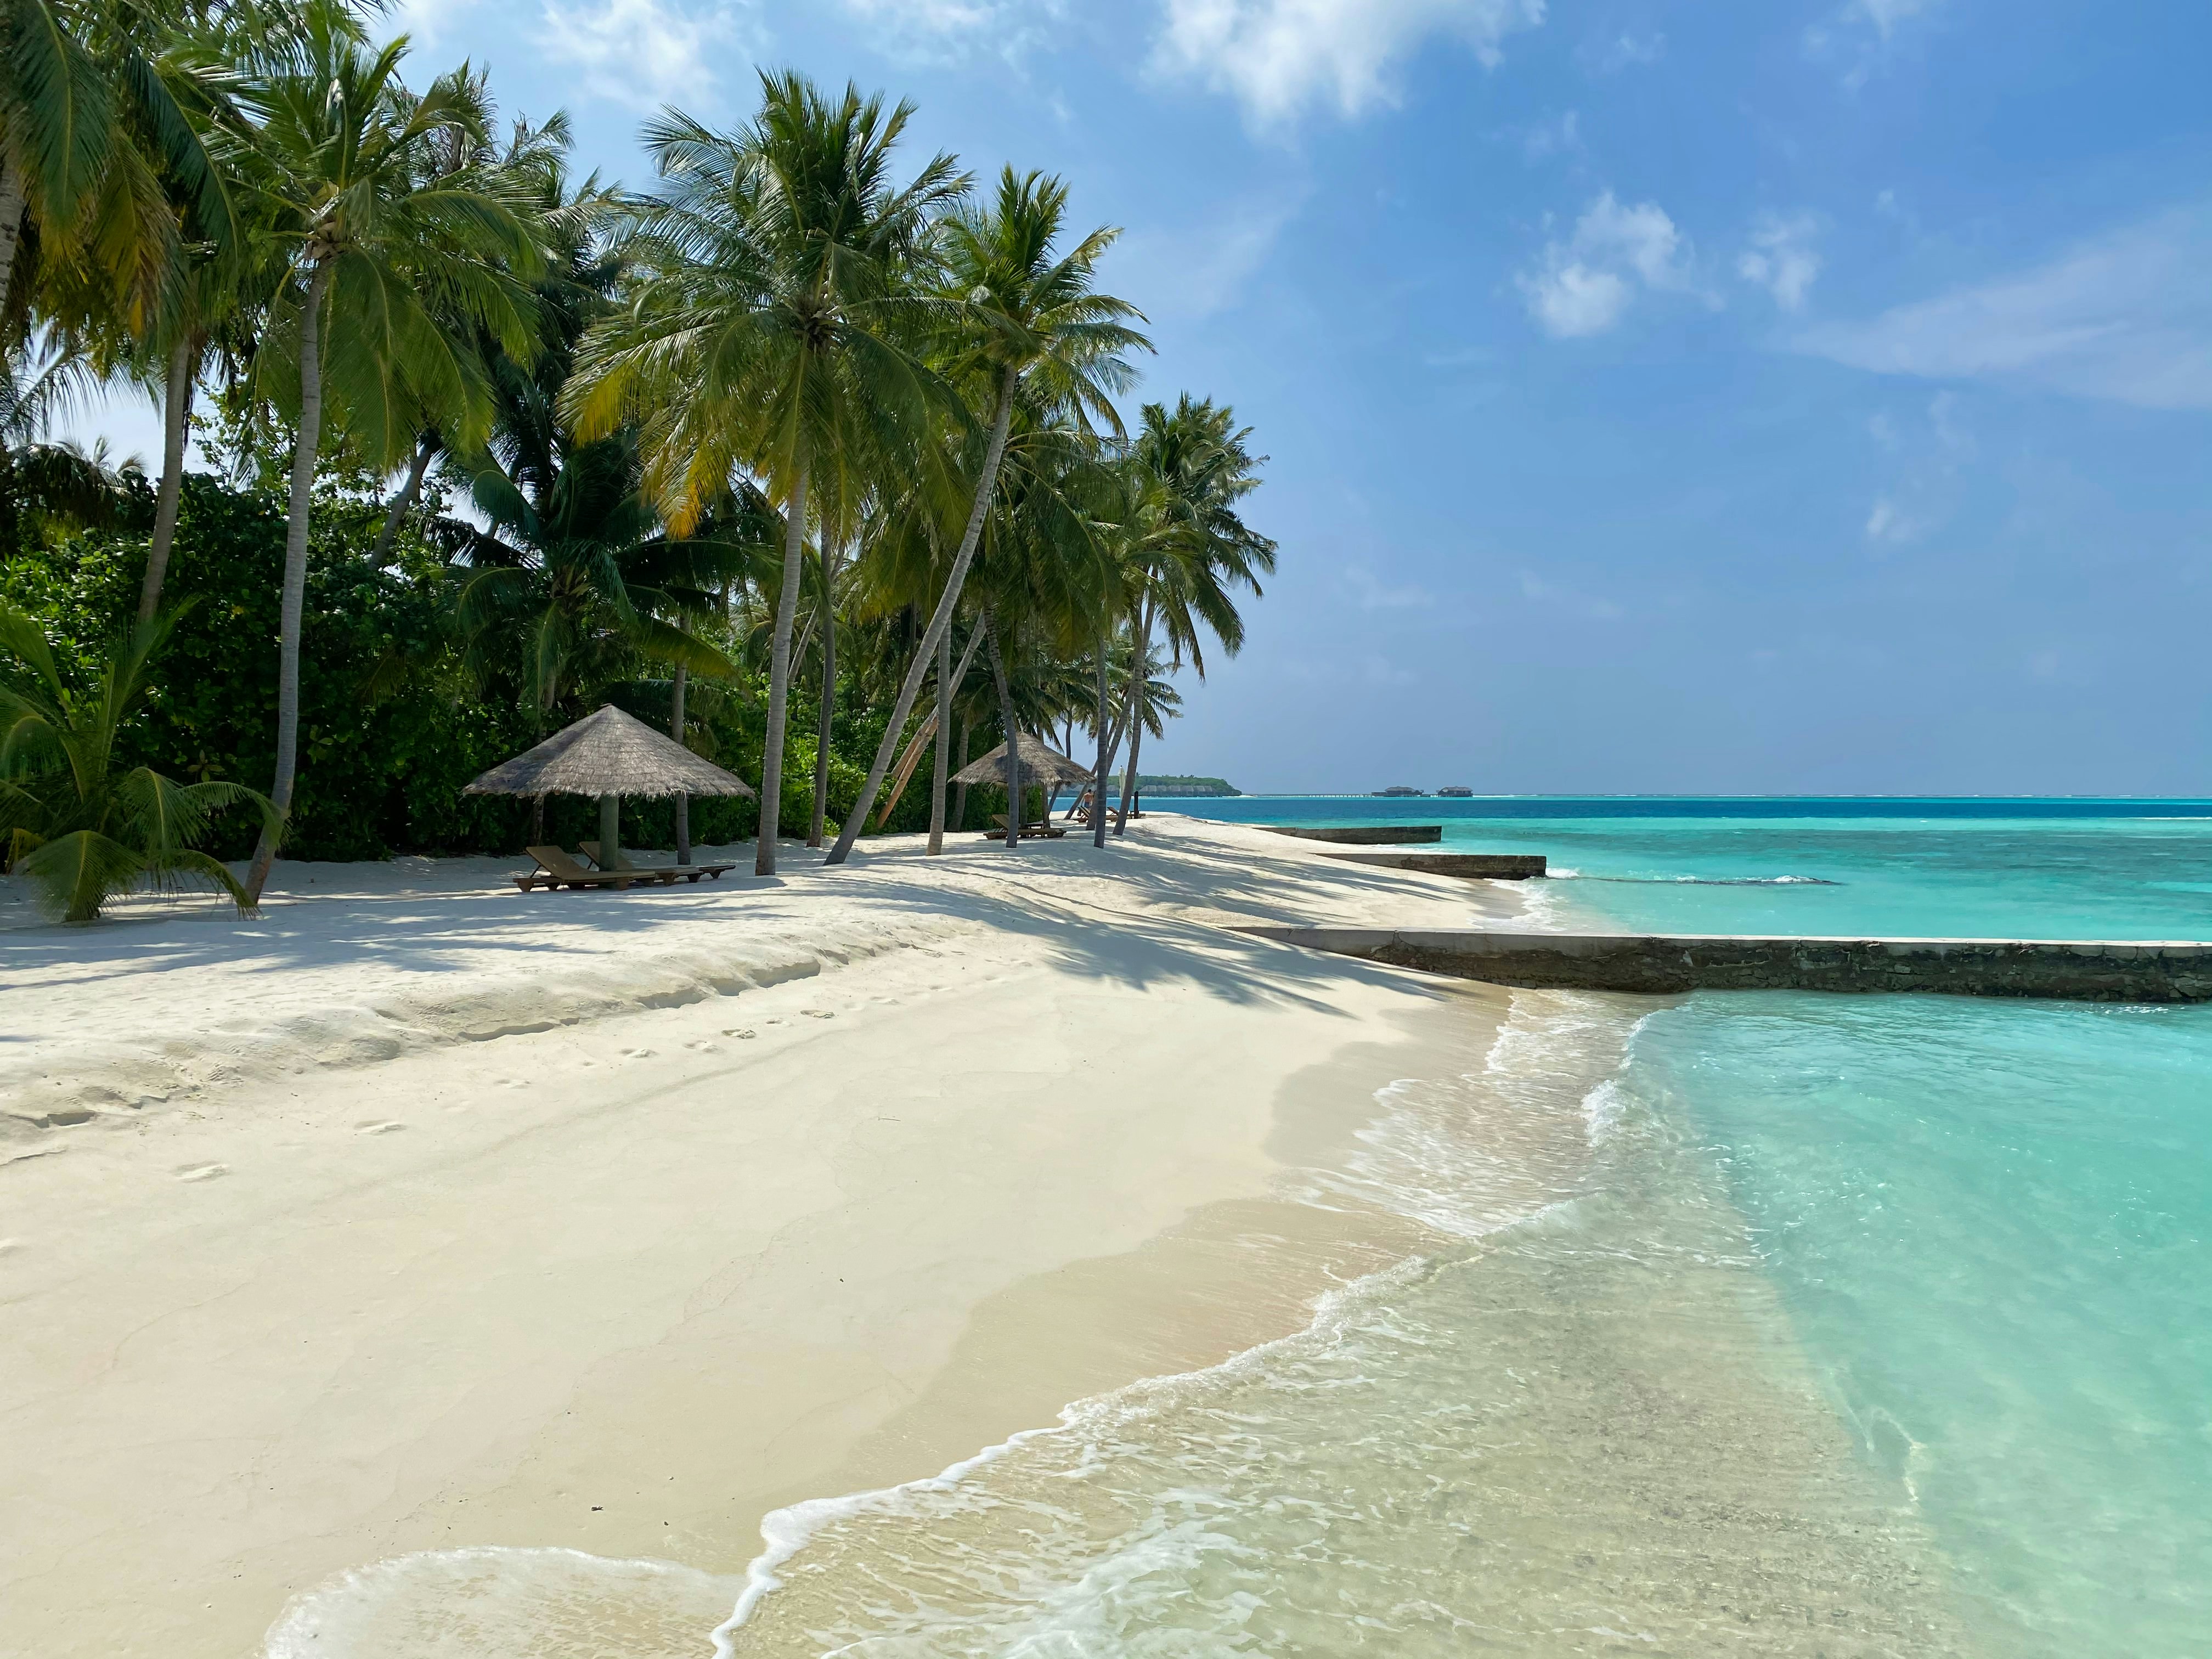 Standing on the smooth sandy beach of Alif Alif in Maldives.